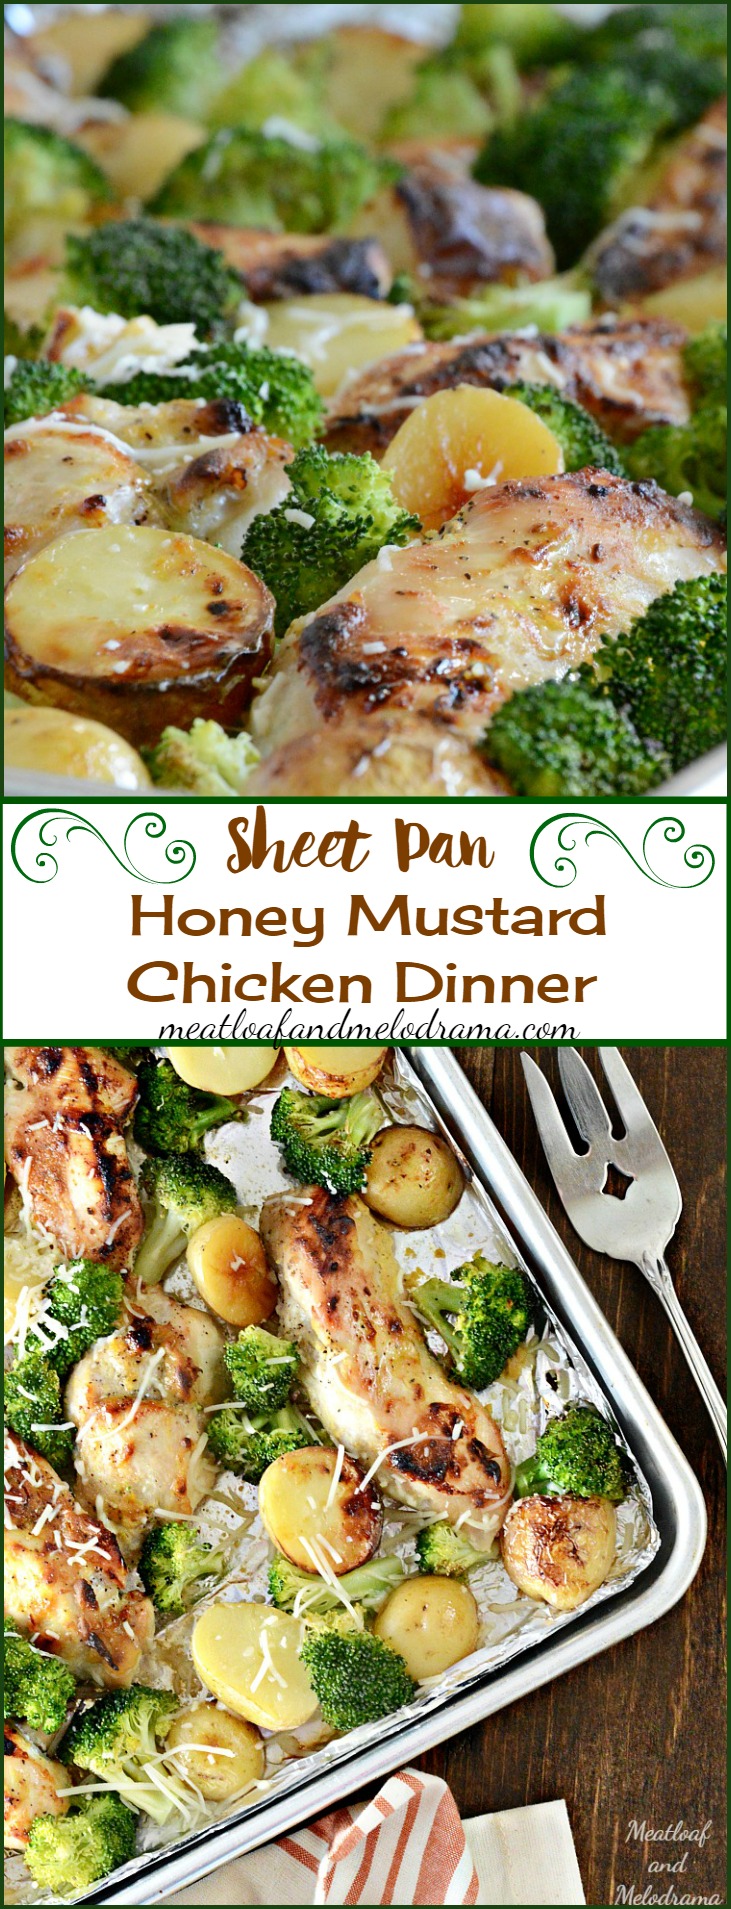 Sheet Pan Honey Mustard Chicken Dinner with Broccolie and Potatoes